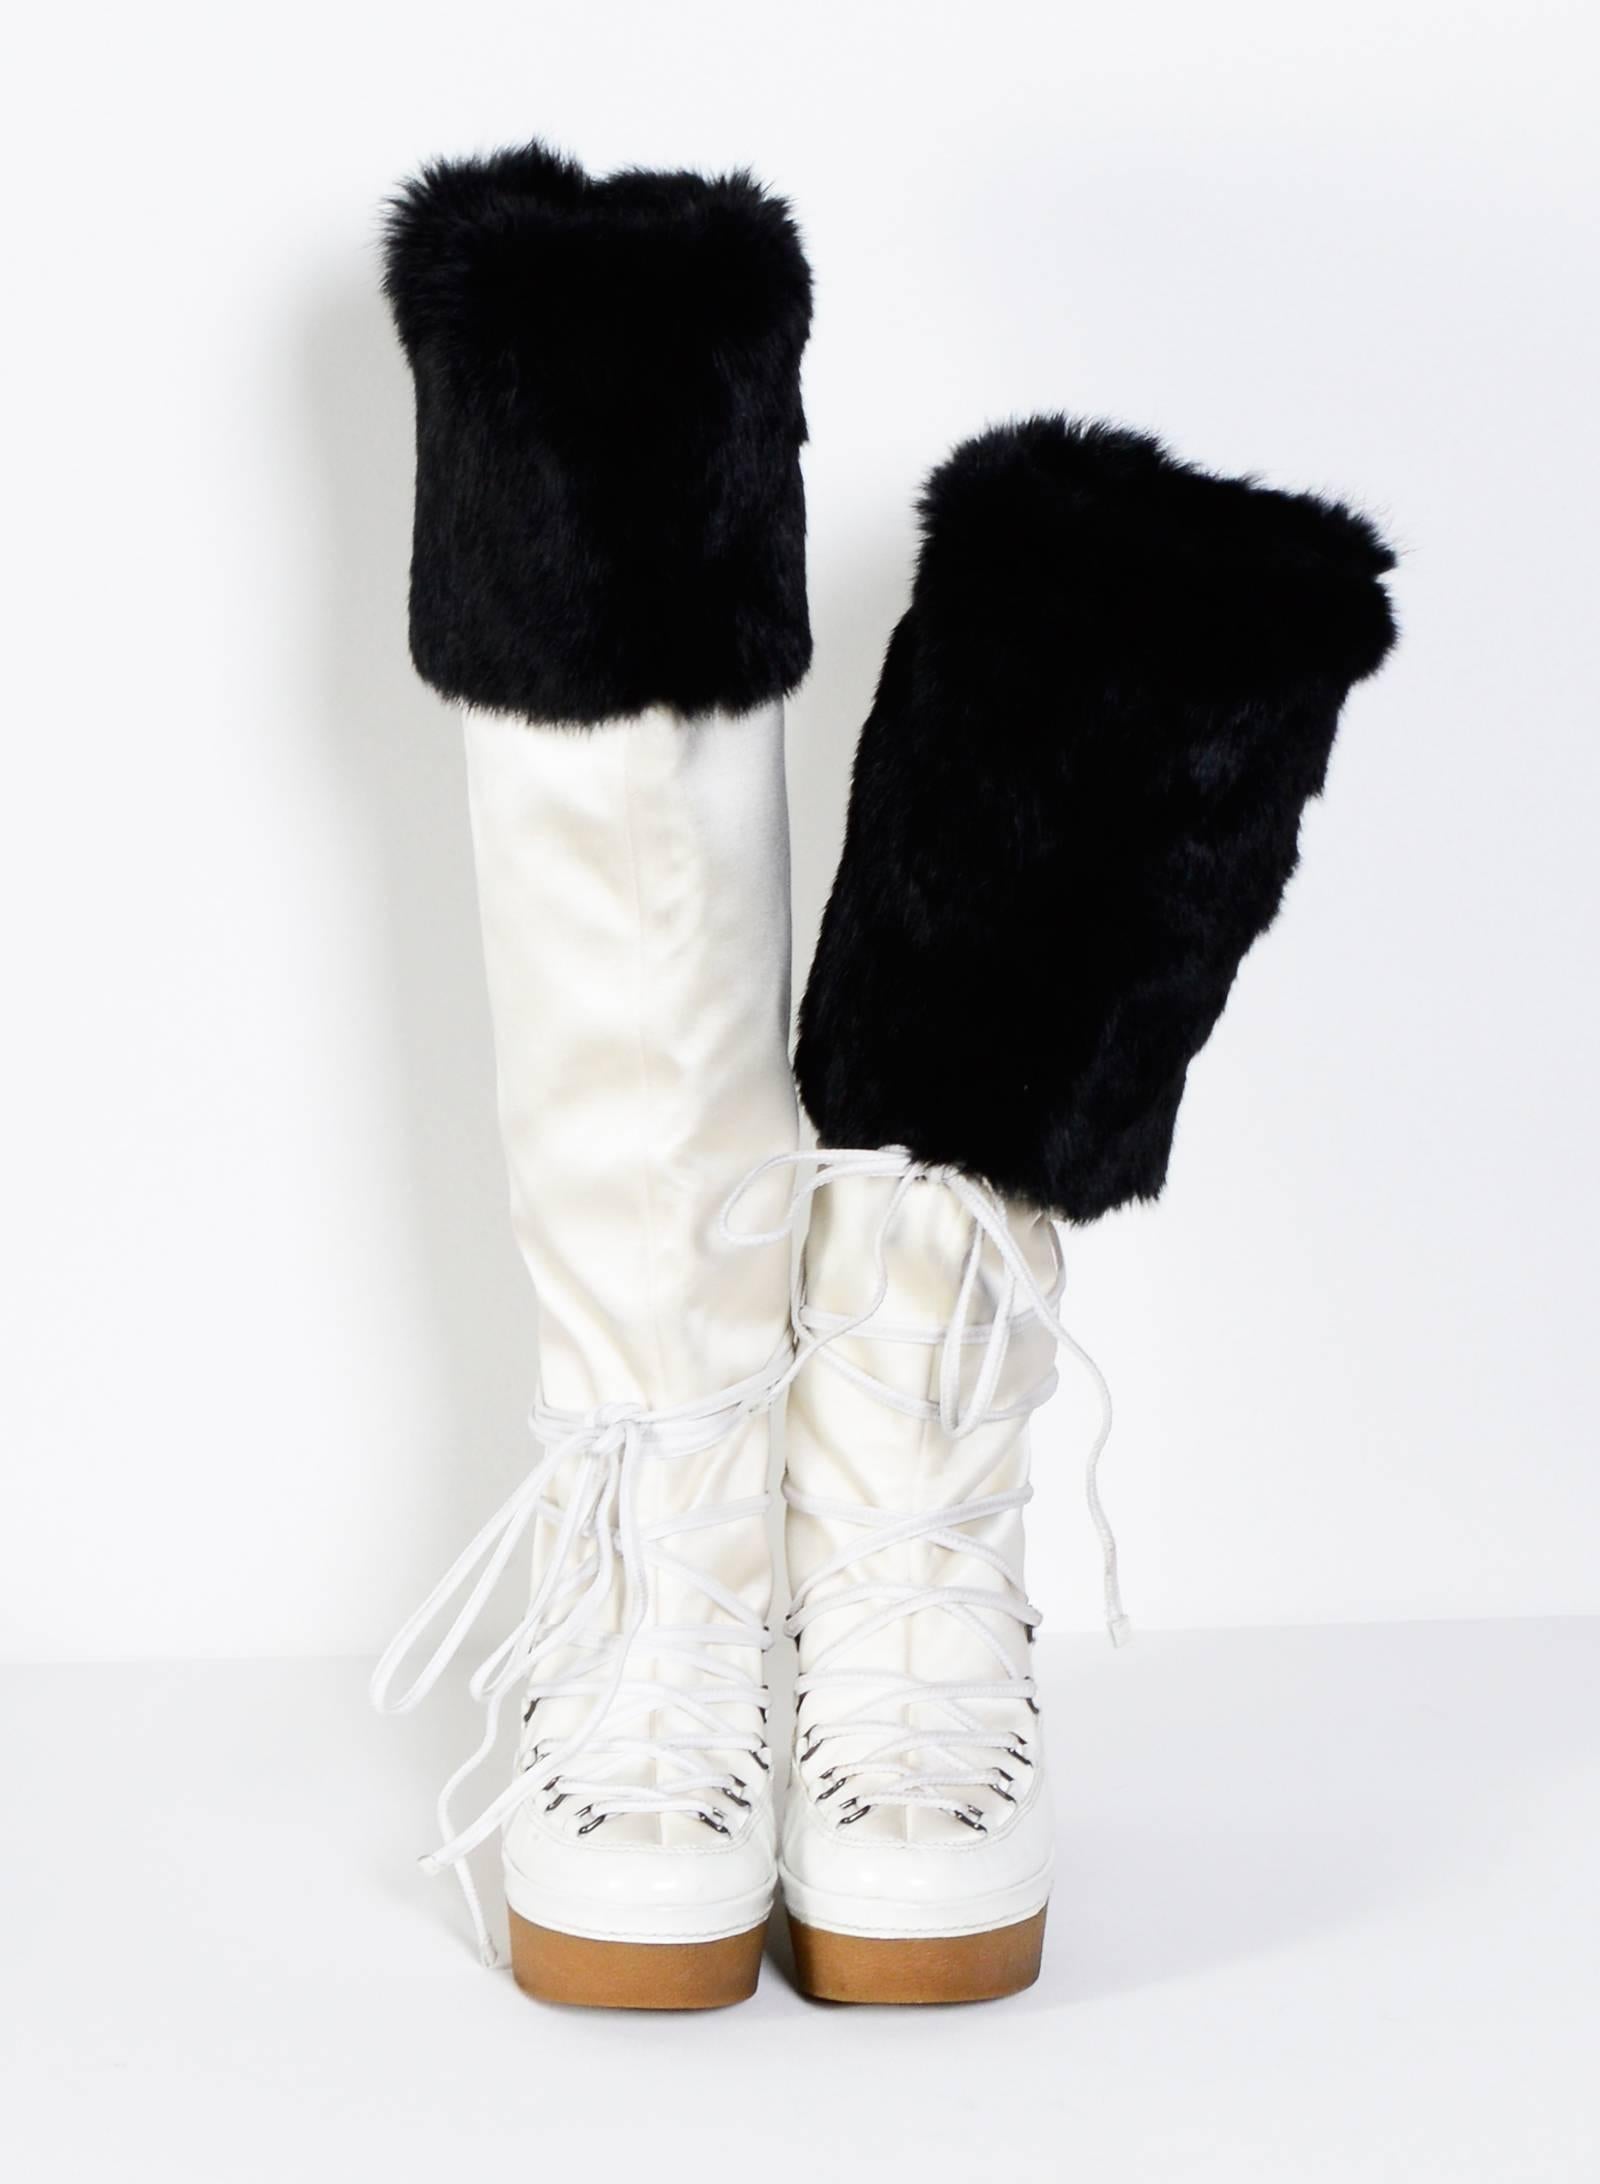 GIVENCHY / Alexander McQueen Boots : made in white patent leather & satin, trimmed with black fur. This boots have not seen the snow yet, maybe worn once, a few nearly invisible marks. Size 39  